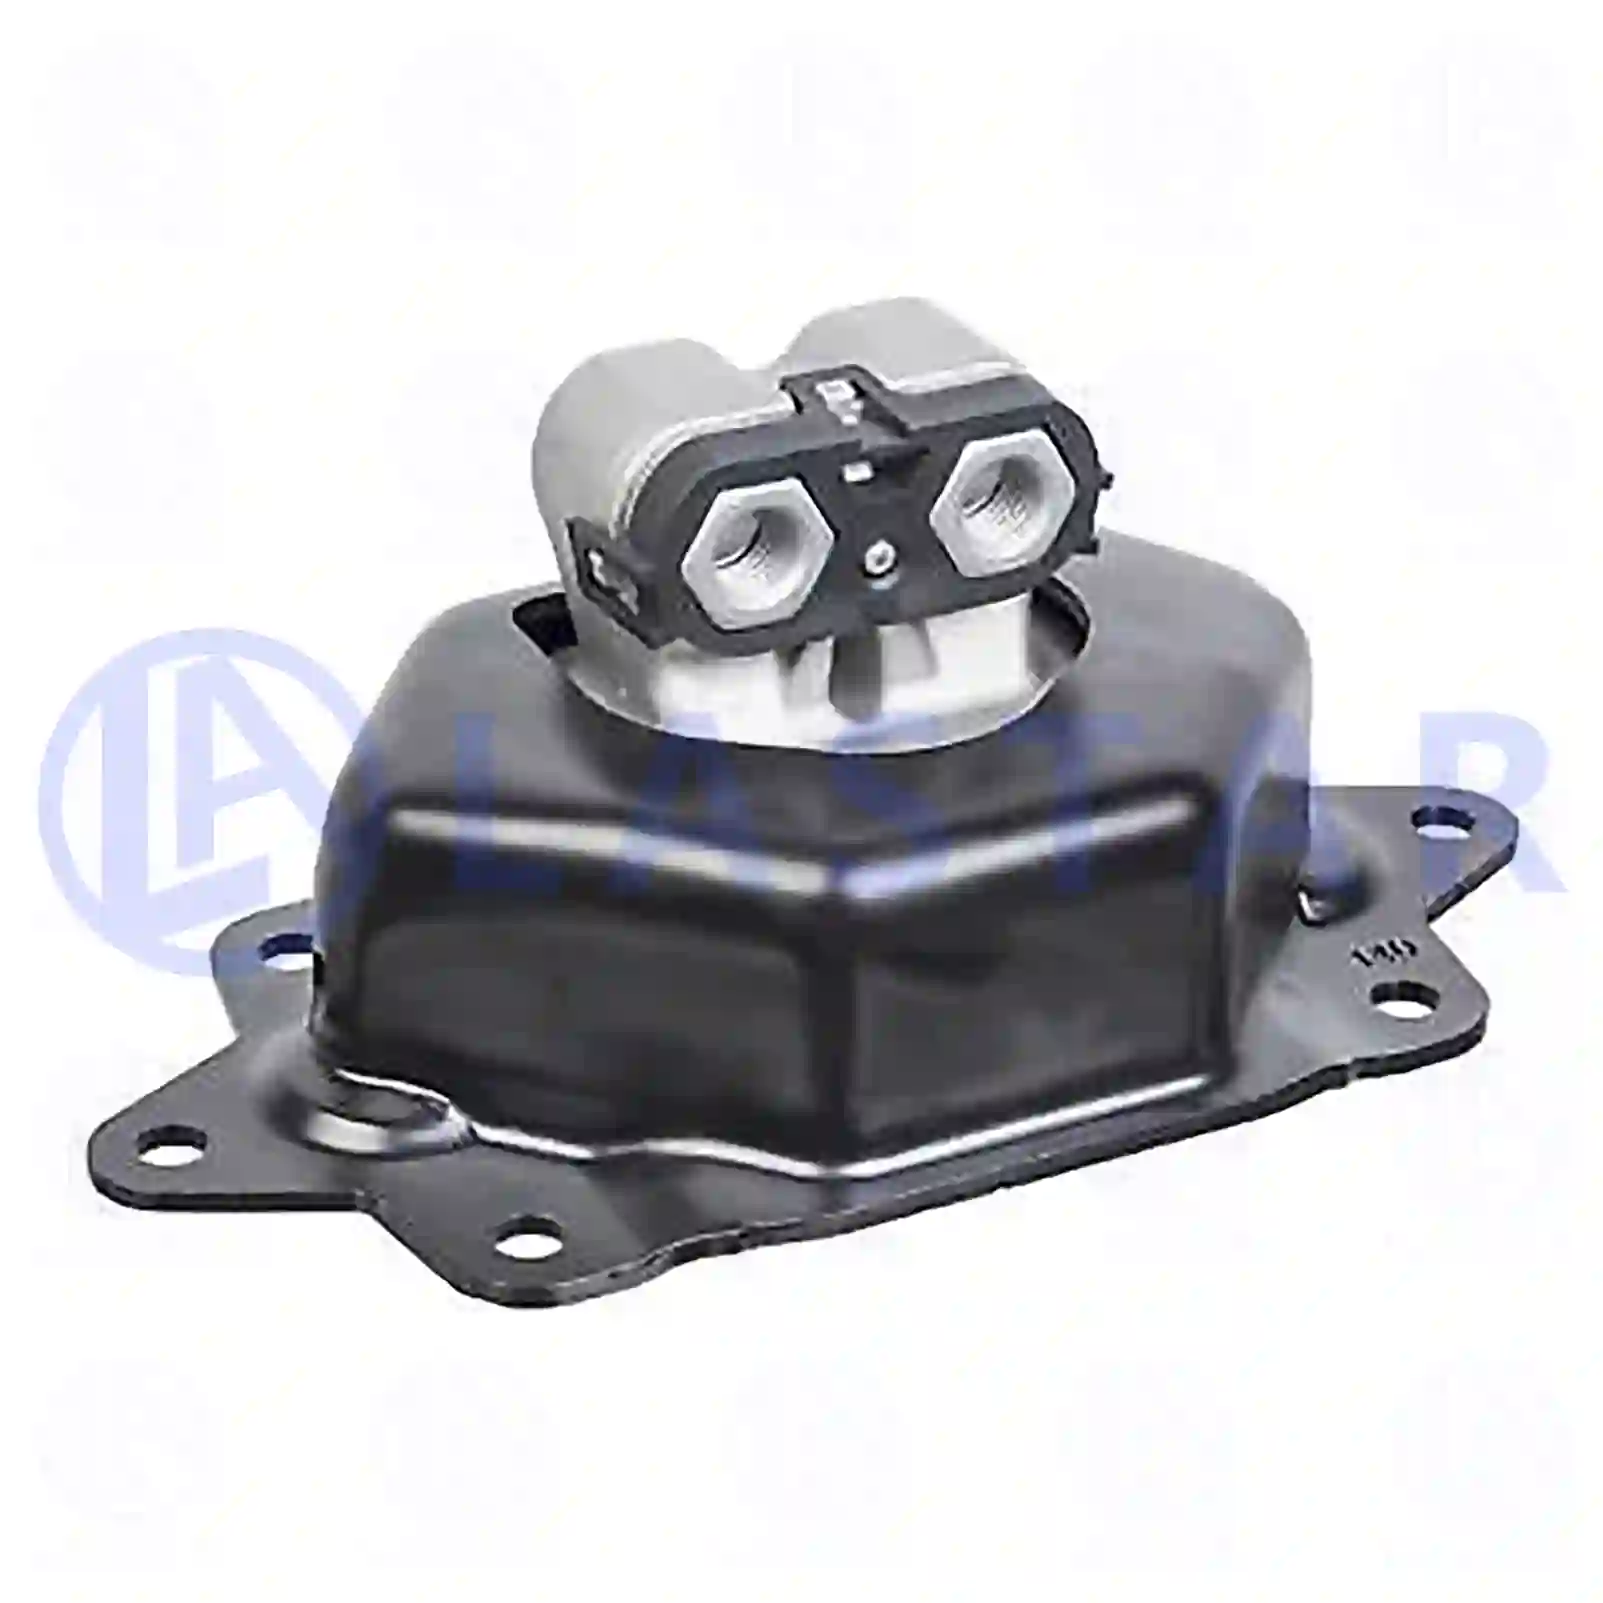 Engine mounting, rear, 77700240, 7421416525, 21416 ||  77700240 Lastar Spare Part | Truck Spare Parts, Auotomotive Spare Parts Engine mounting, rear, 77700240, 7421416525, 21416 ||  77700240 Lastar Spare Part | Truck Spare Parts, Auotomotive Spare Parts